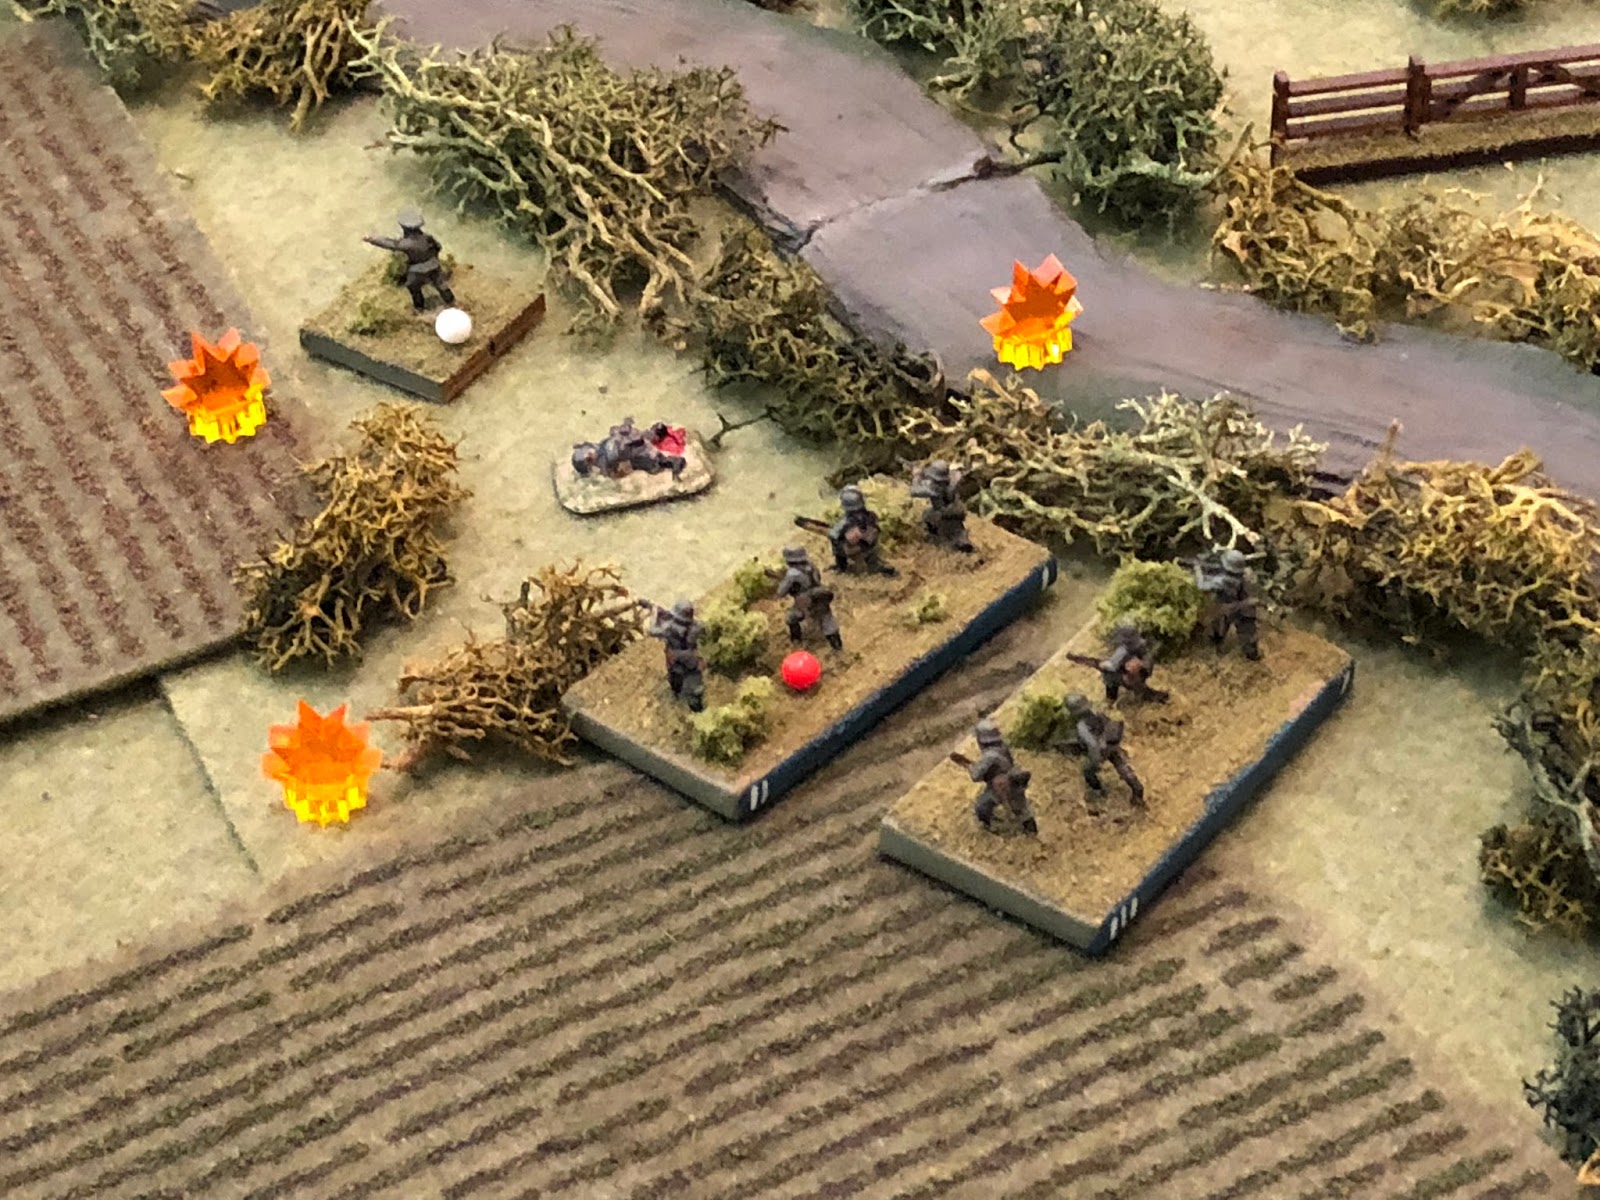  And the French fusillade is furious, knocking out SSgt Aust's 1st Squad and suppressing Lt Klugmann and Sgt Kamphaus' 2nd Squad (red bead, Lt Klugmann has a white bead but it should be red, too, I just screwed up).   